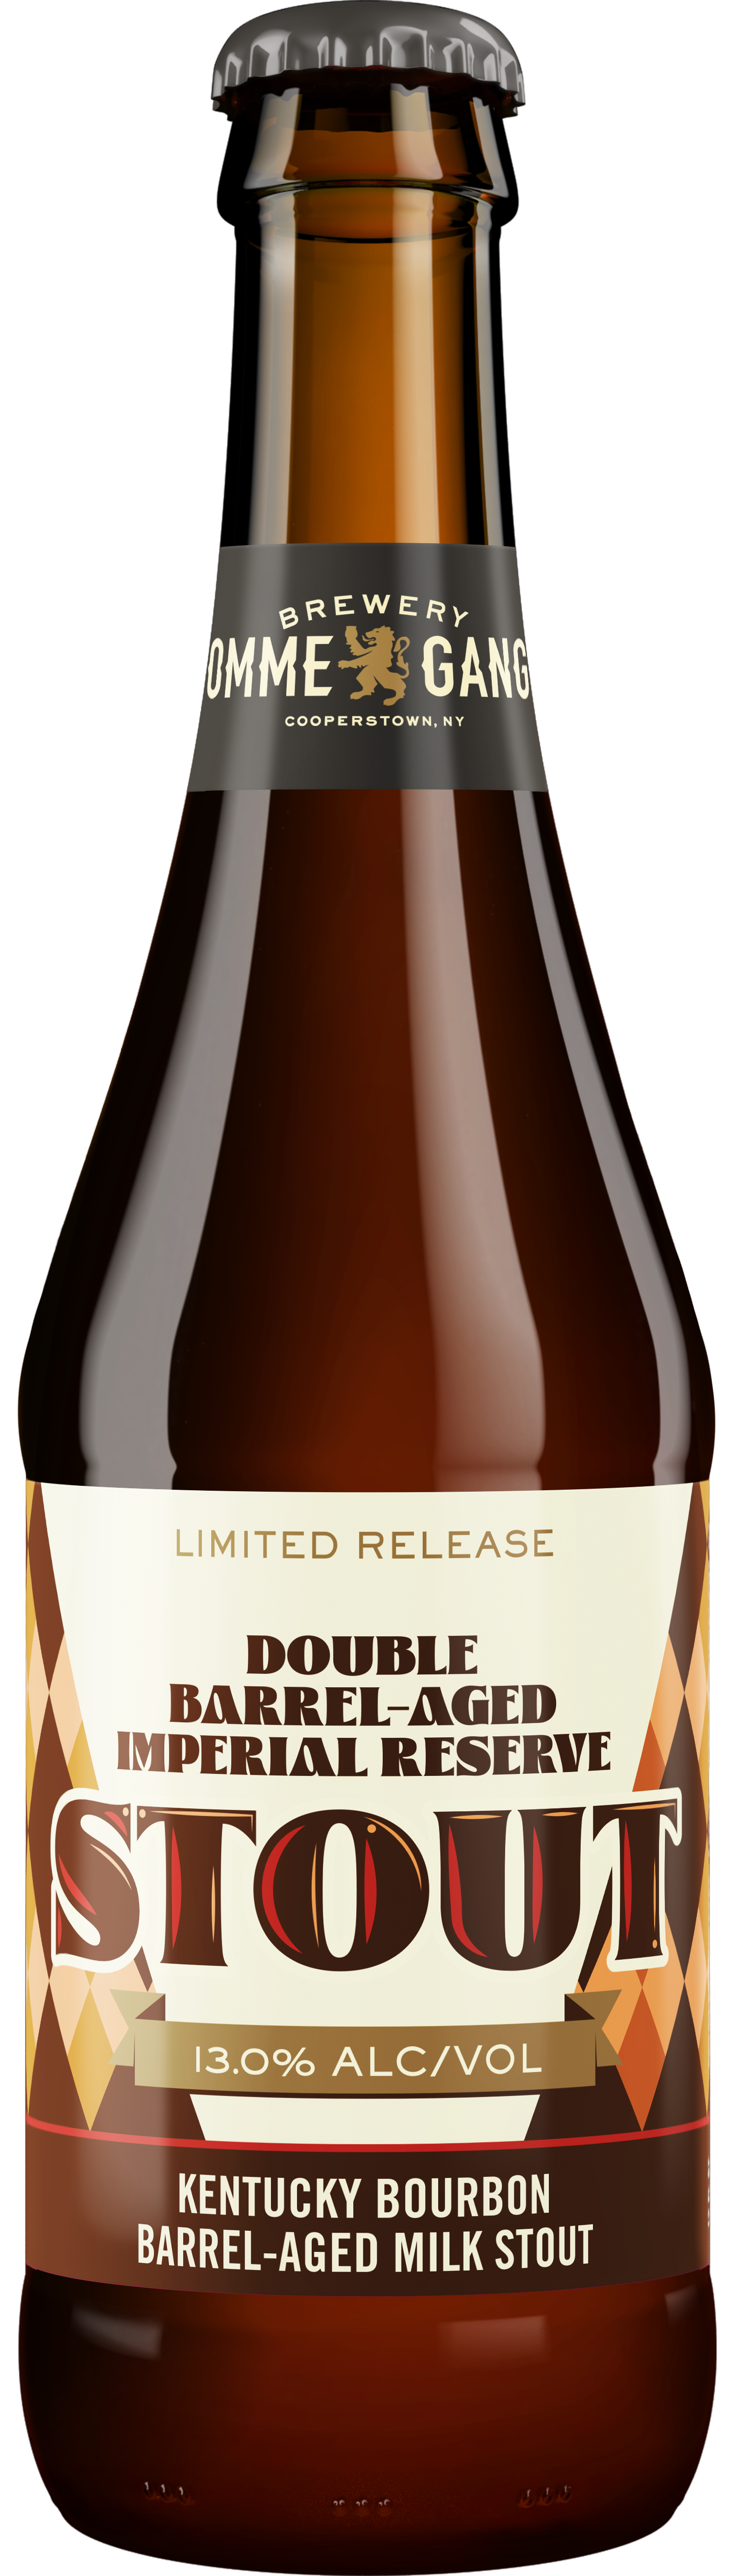 Double Barrel-Aged Imperial Reserve Stout